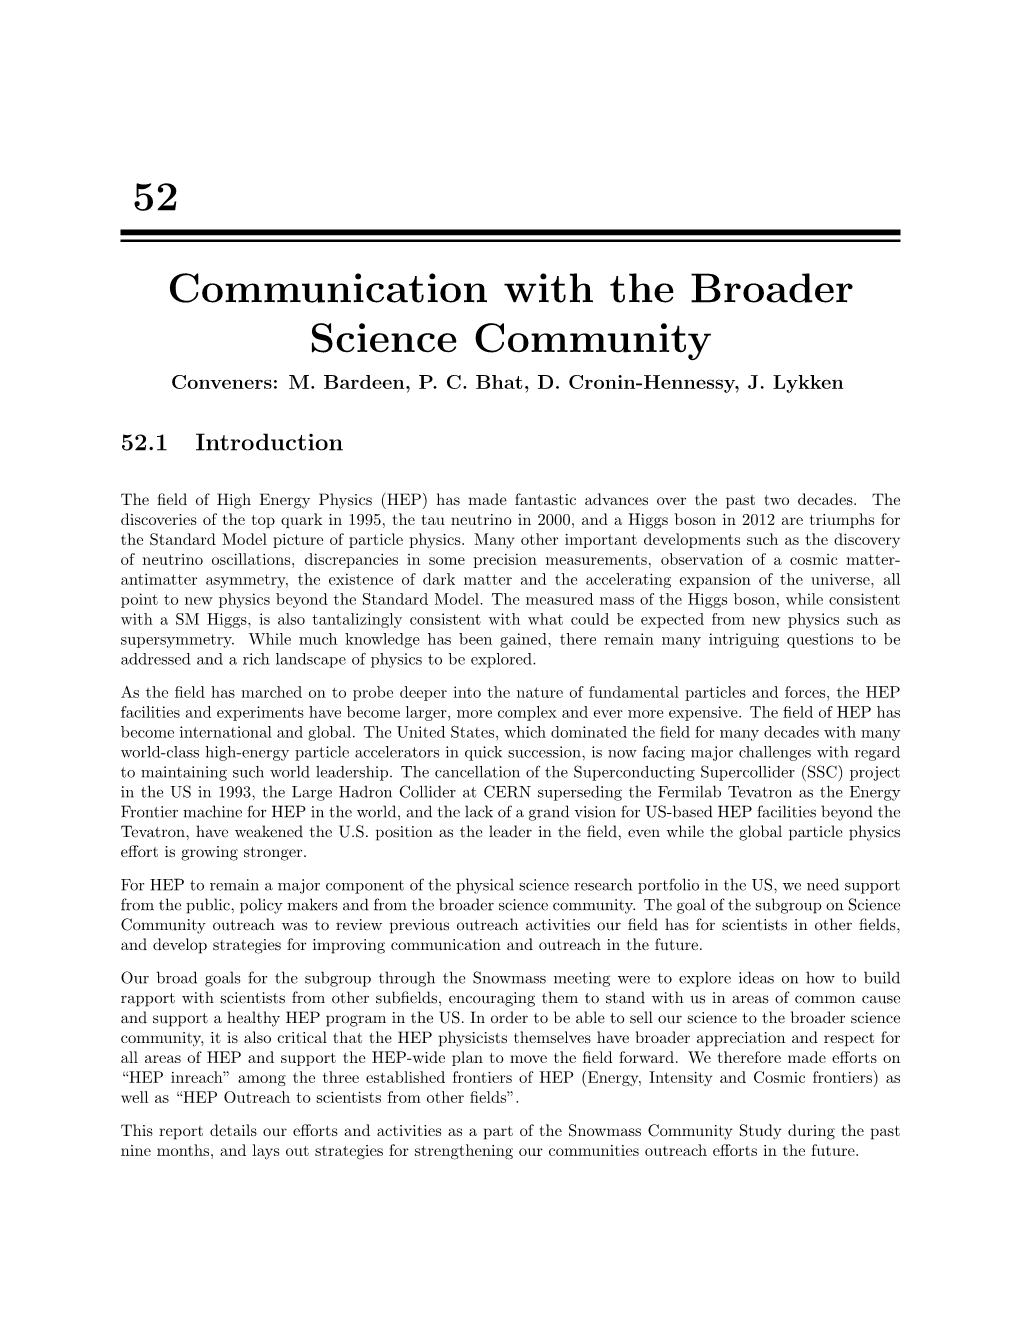 52 Communication with the Broader Science Community